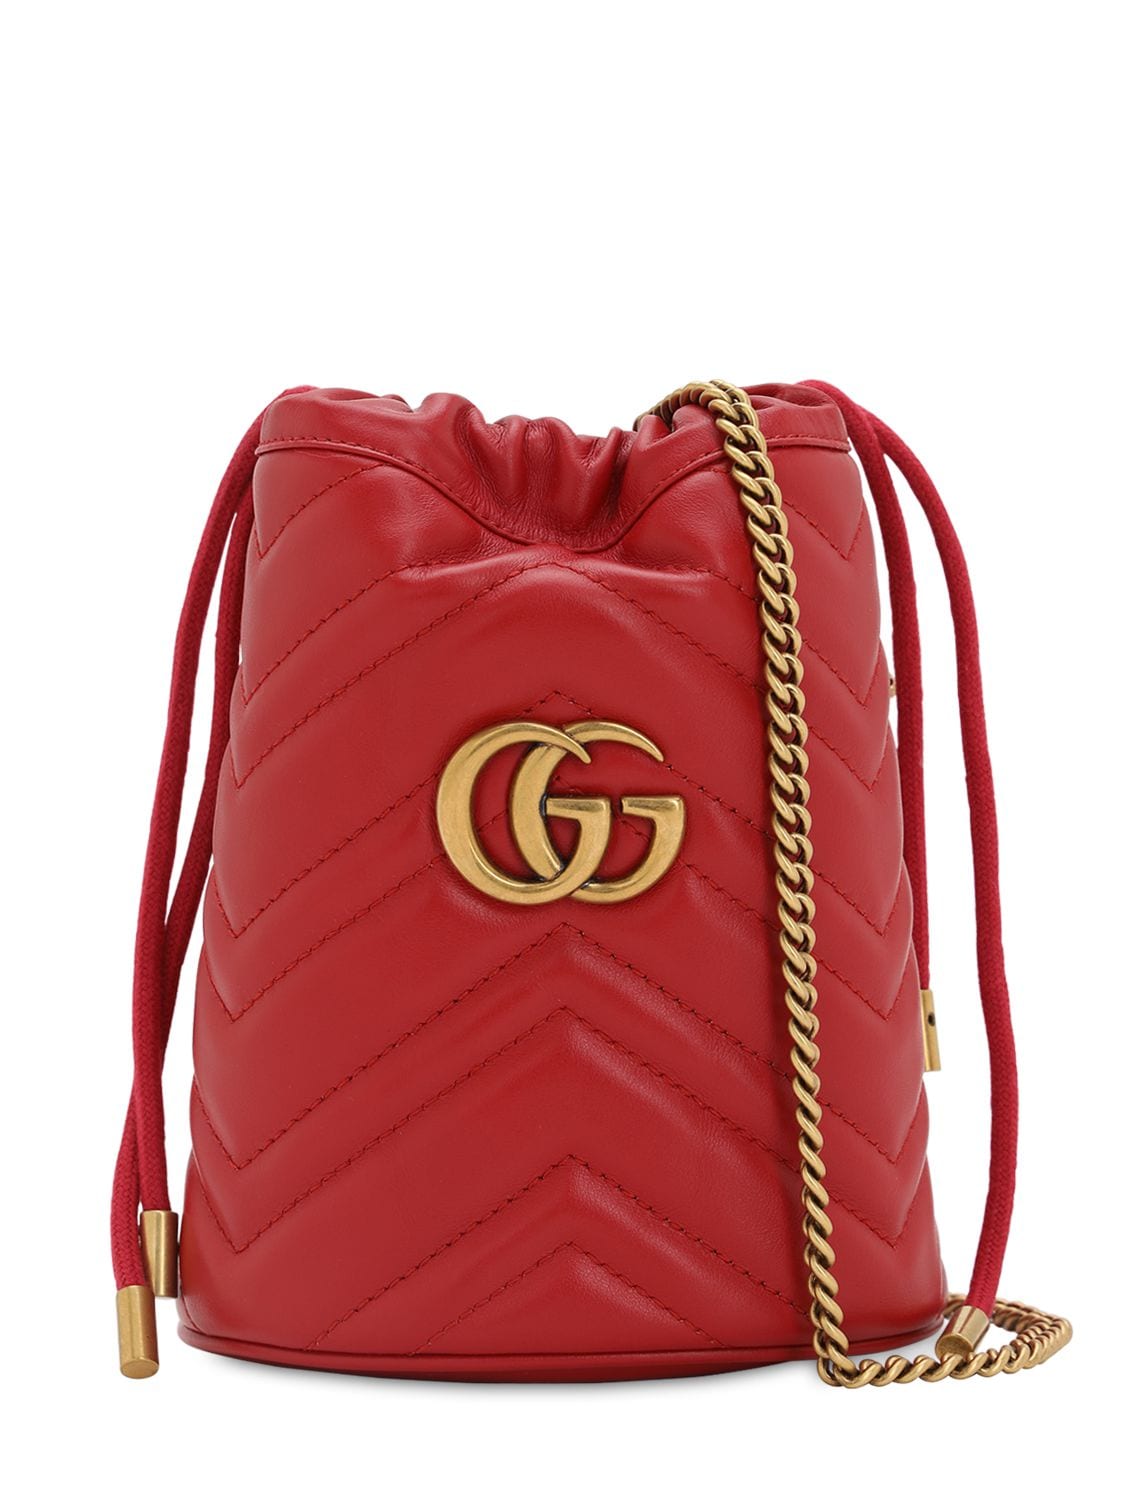 Gucci Mini Gg Marmont 2.0 Leather Bucket Bag In Hibiscus Red | ModeSens